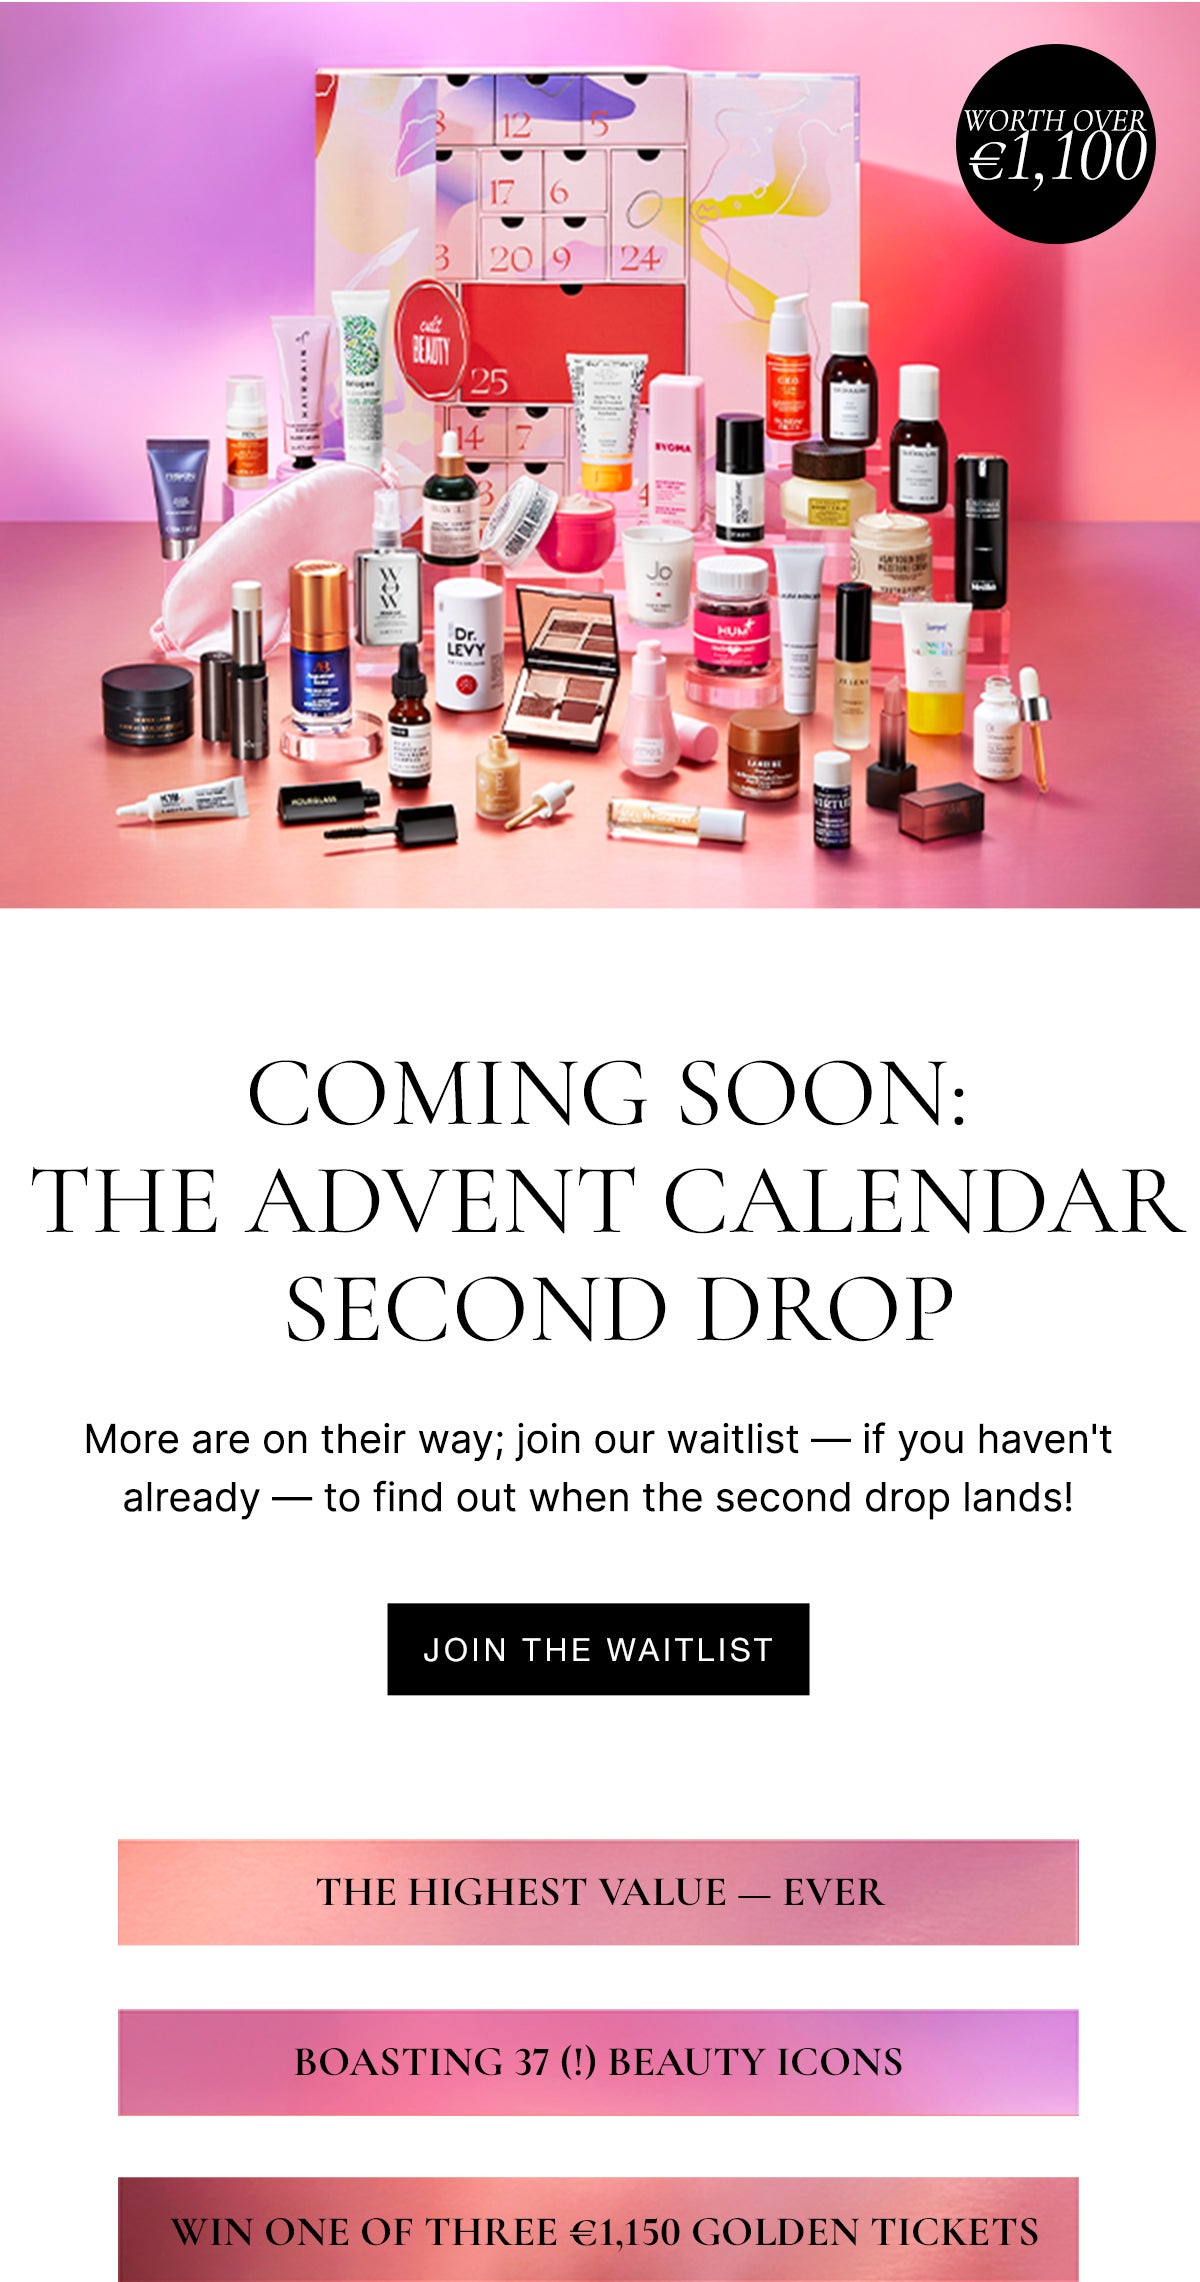 COMING SOON: THE ADVENT CALENDAR SECOND DROP - More are on their way; join our waitlist - if you haven't already - to find out when the second drop lands!